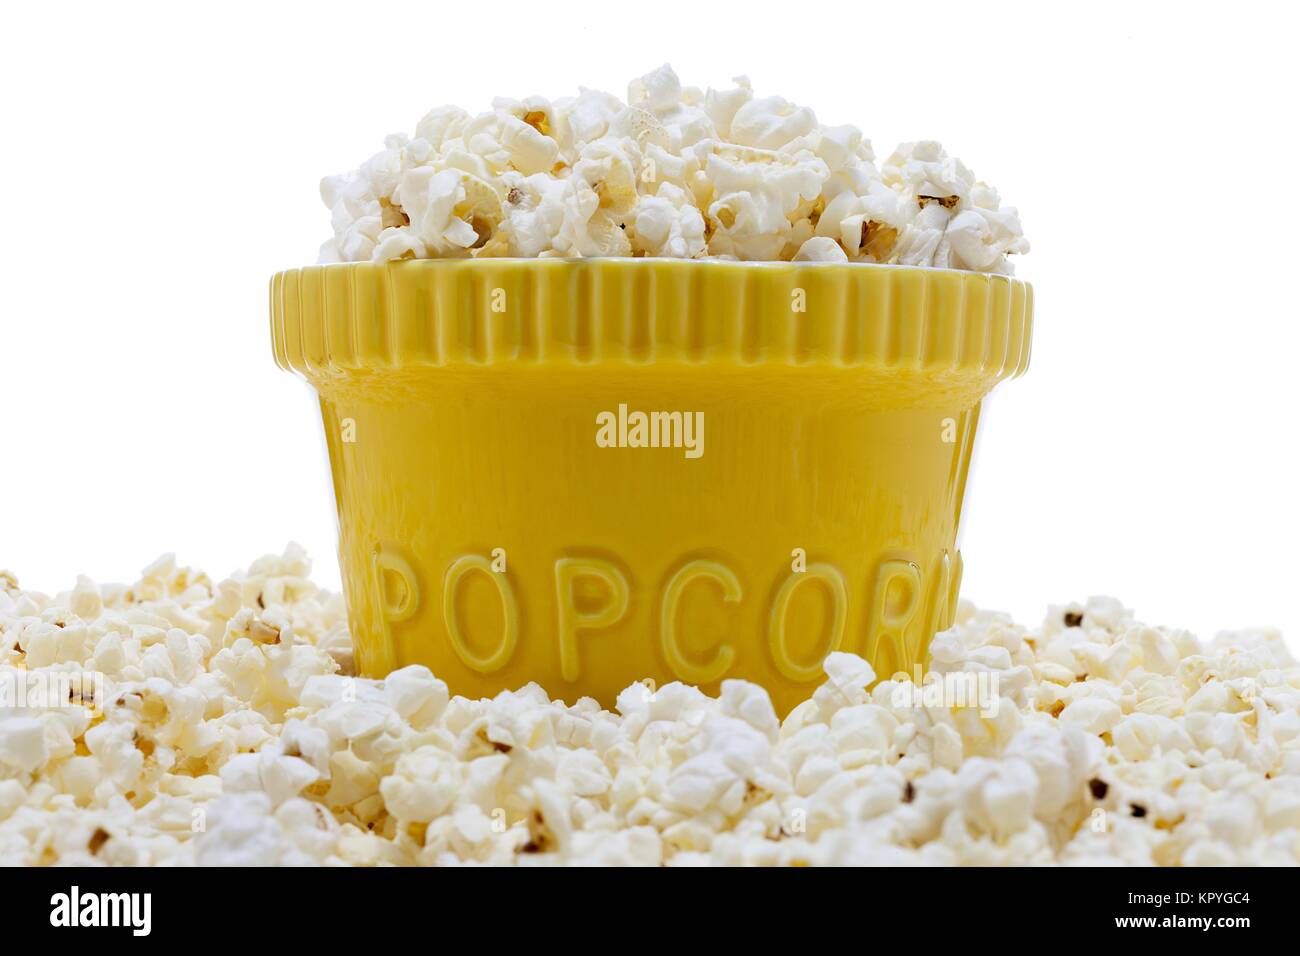 Download Overflowing Popcorn In The Yellow Bucket Stock Photo Alamy Yellowimages Mockups